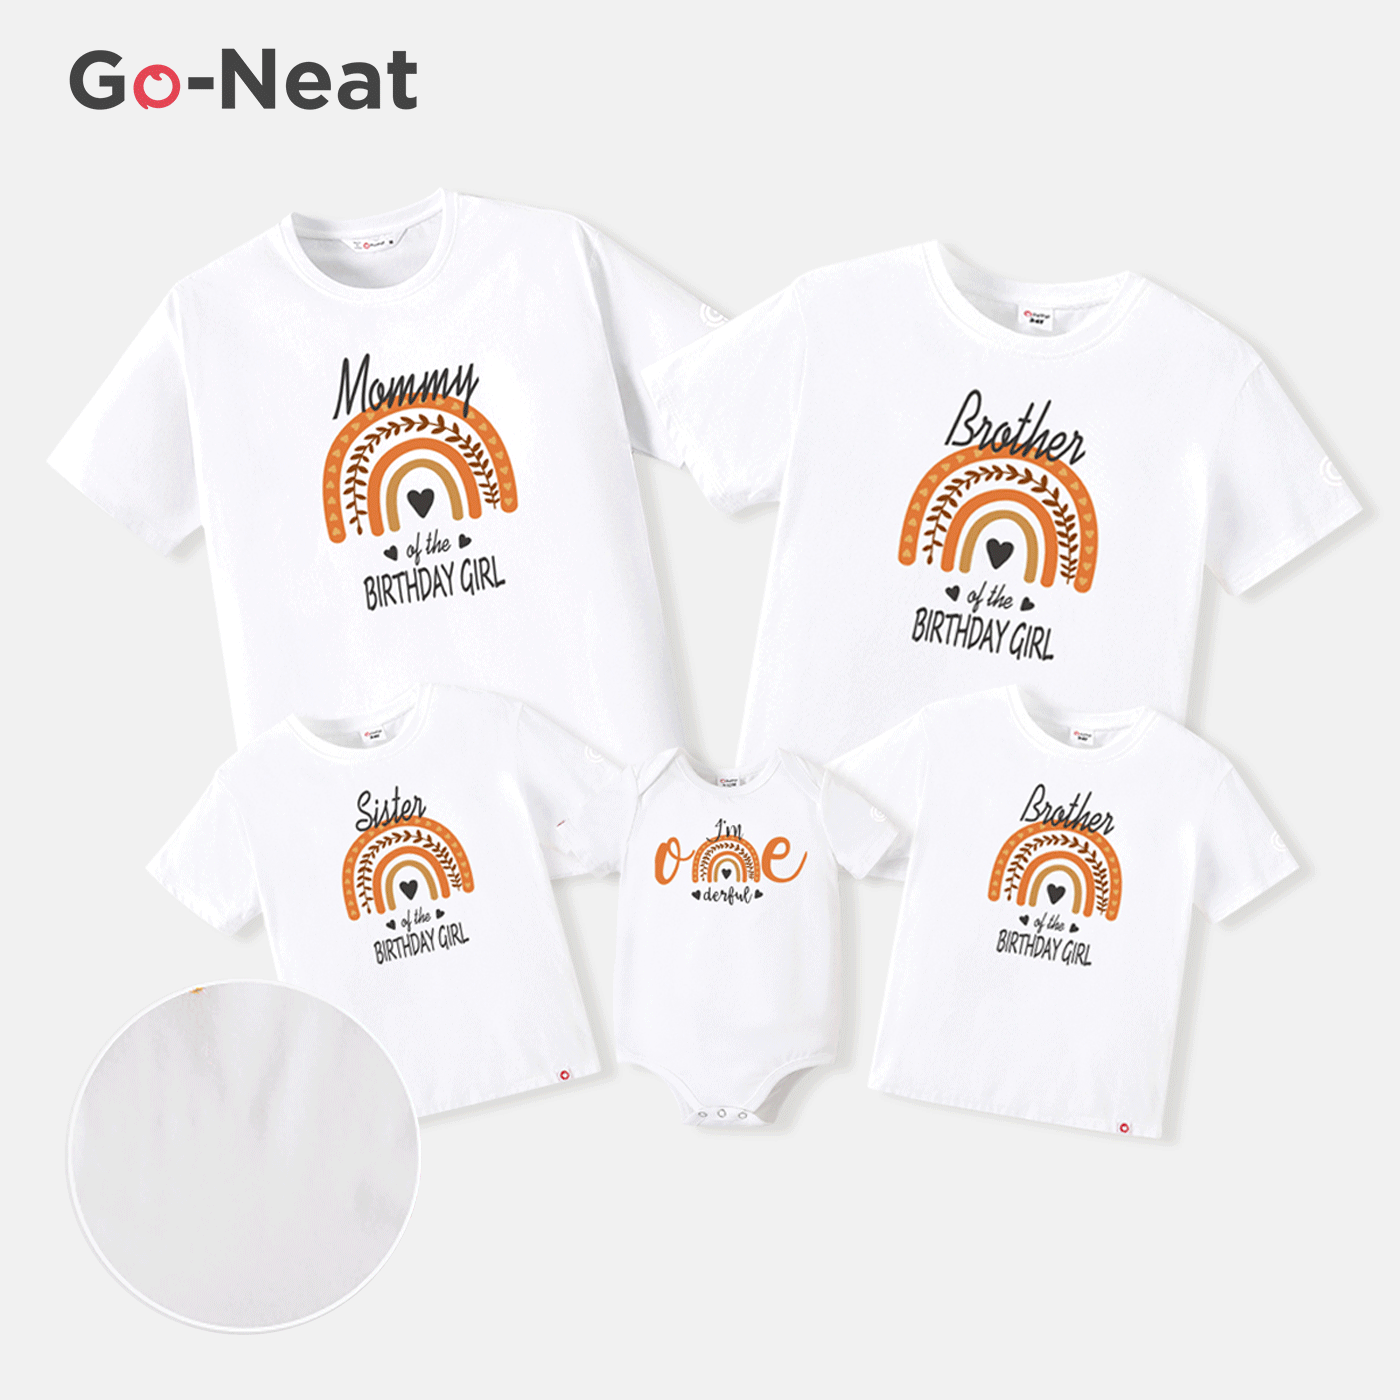 Go-Neat Water Repellent and Stain Resistant Family Matching Rainbow & Letter Print Short-sleeve Birthday Tee